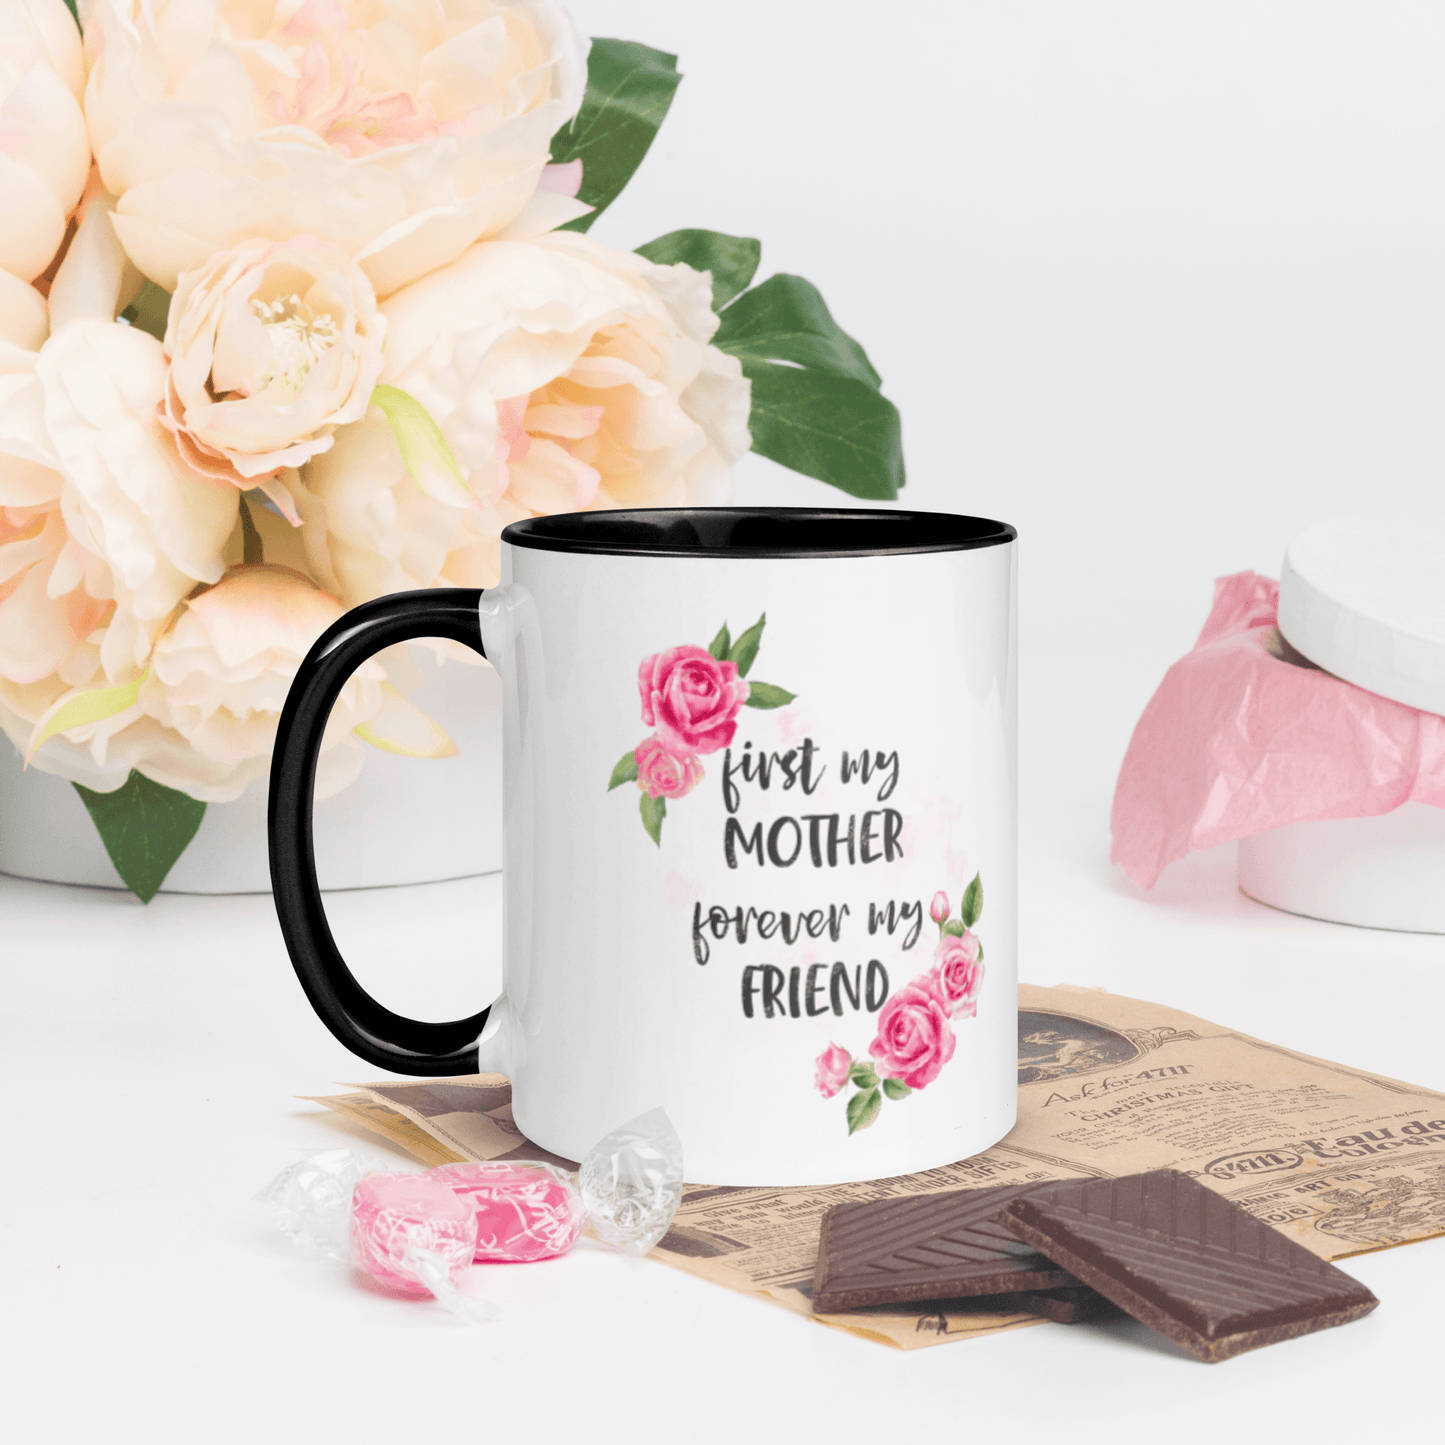 First my Mother, Forever My Friend ❤️ Ceramic Mug with Color Accent (Available in Various Colors!) - The Grateful Hearts